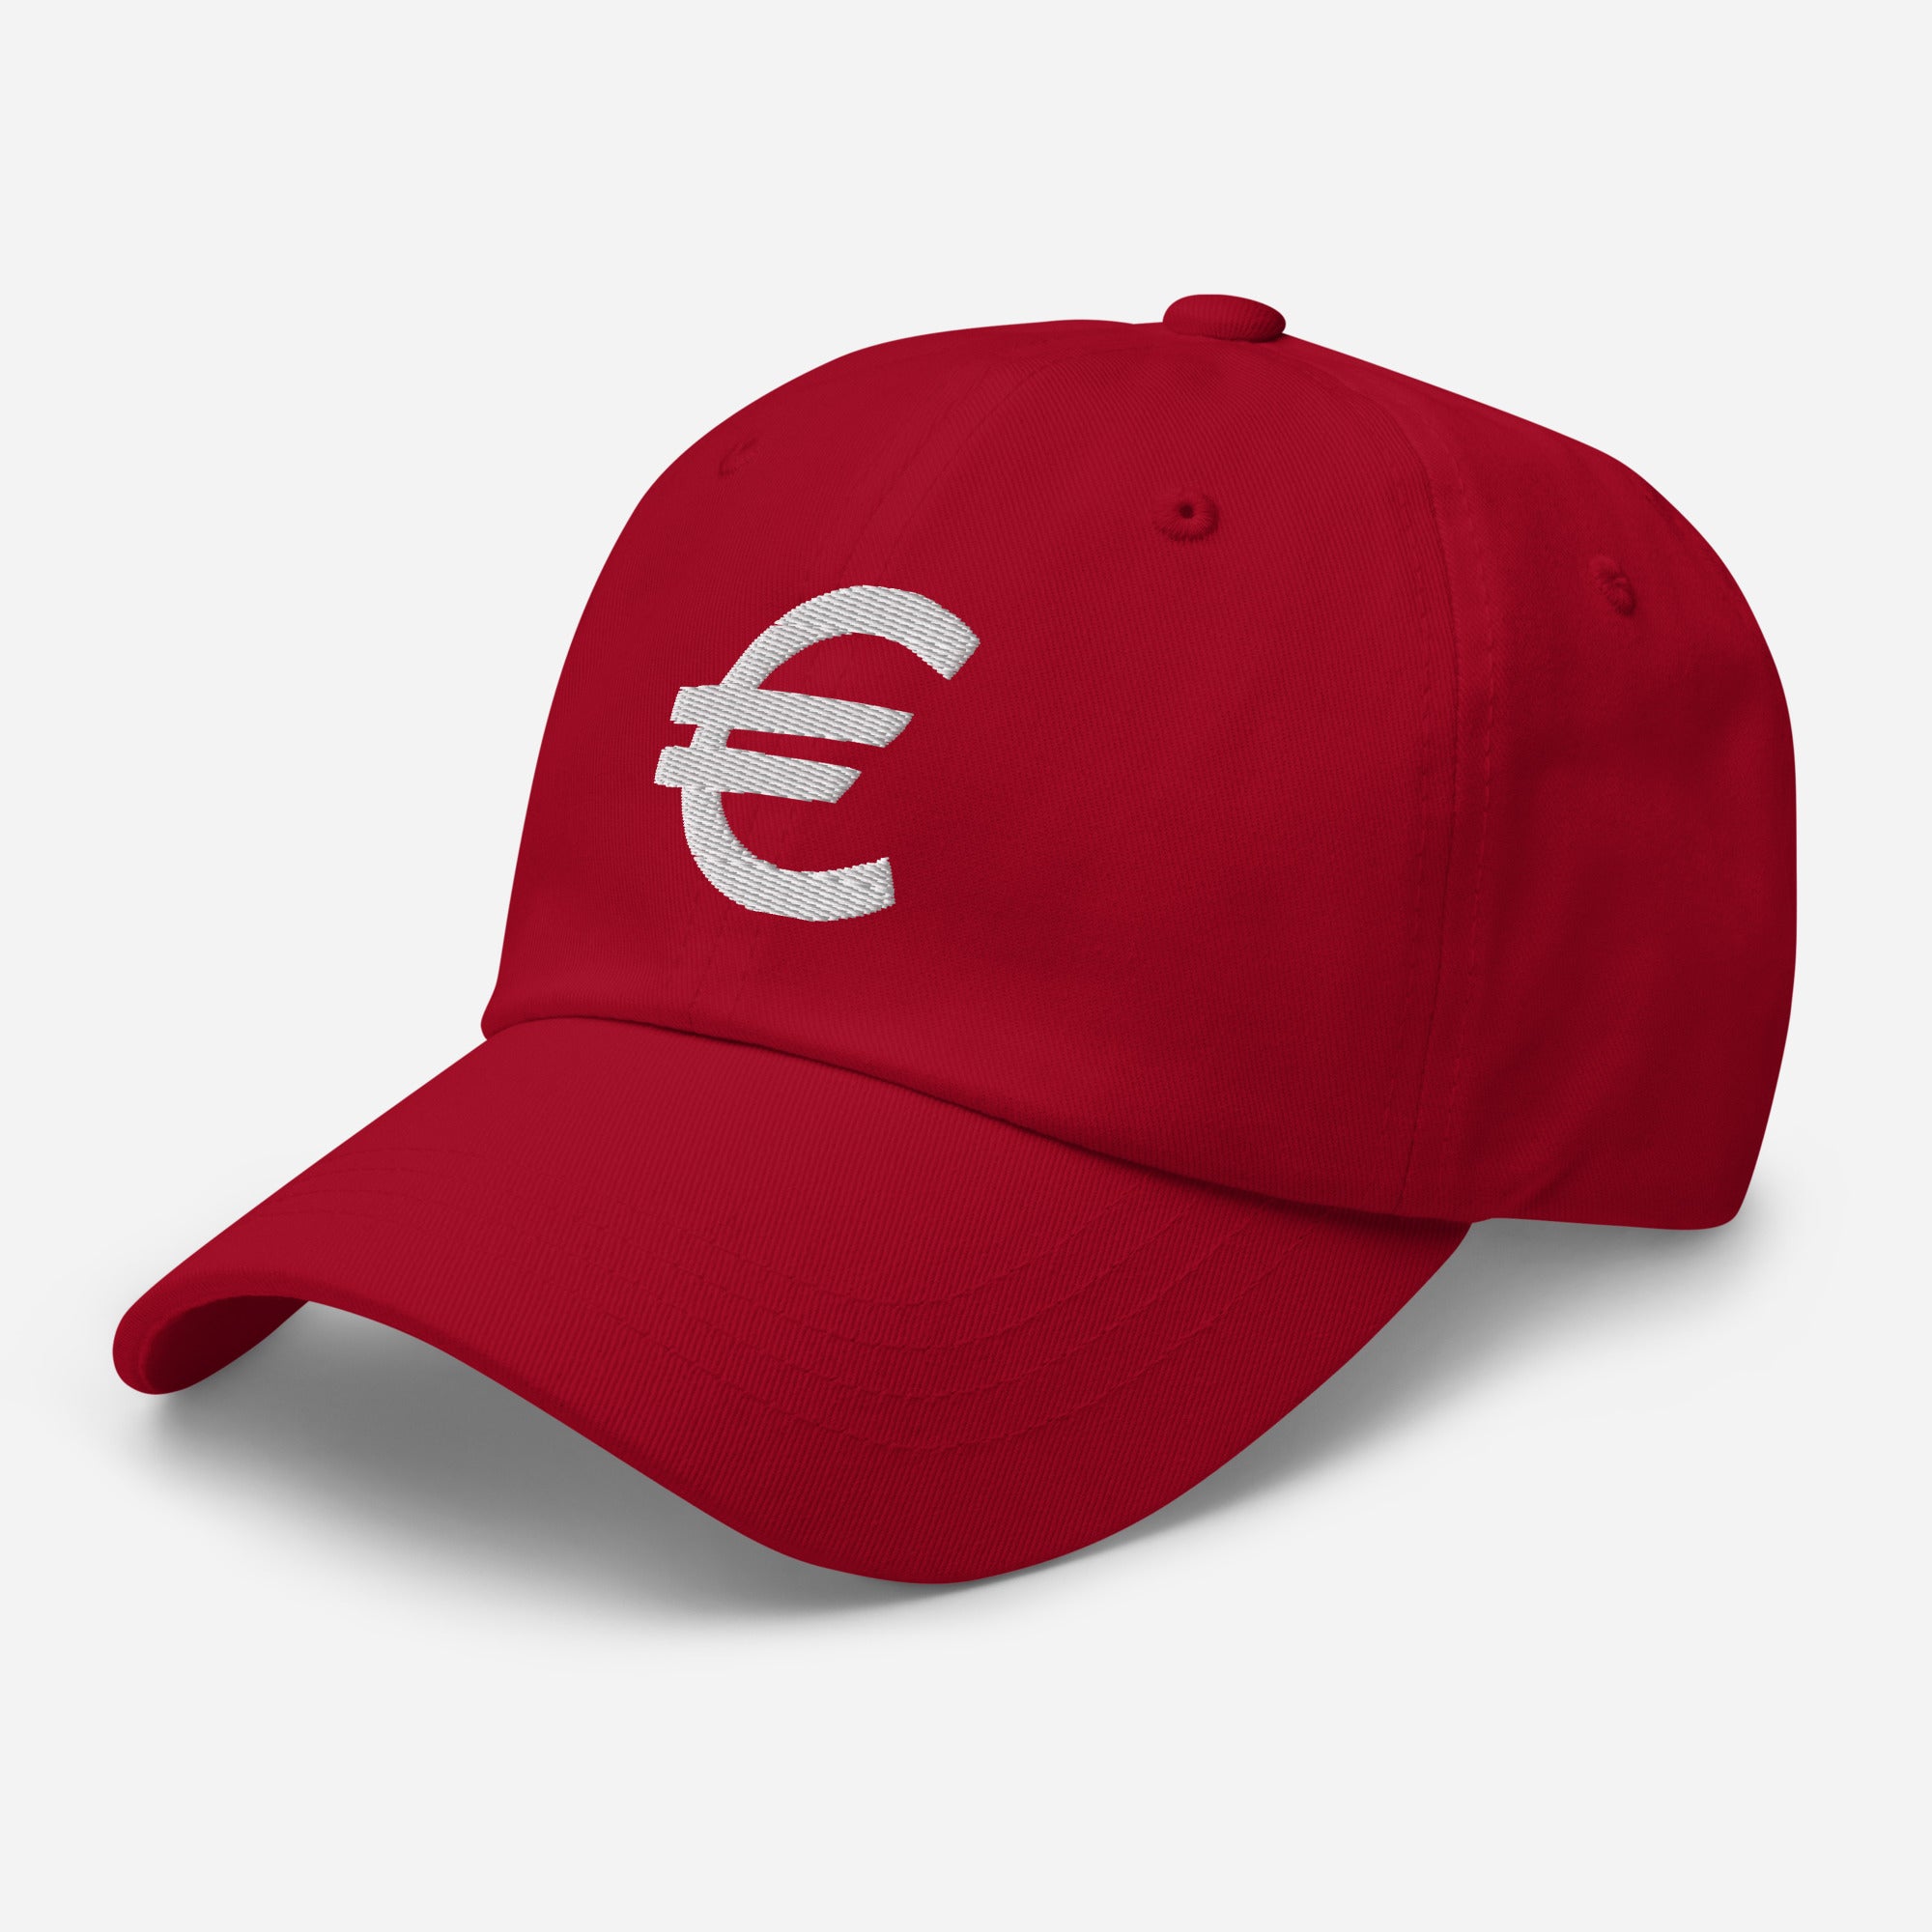 The Euro Currency Money Symbol of European Union Embroidered Baseball Cap Dad hat